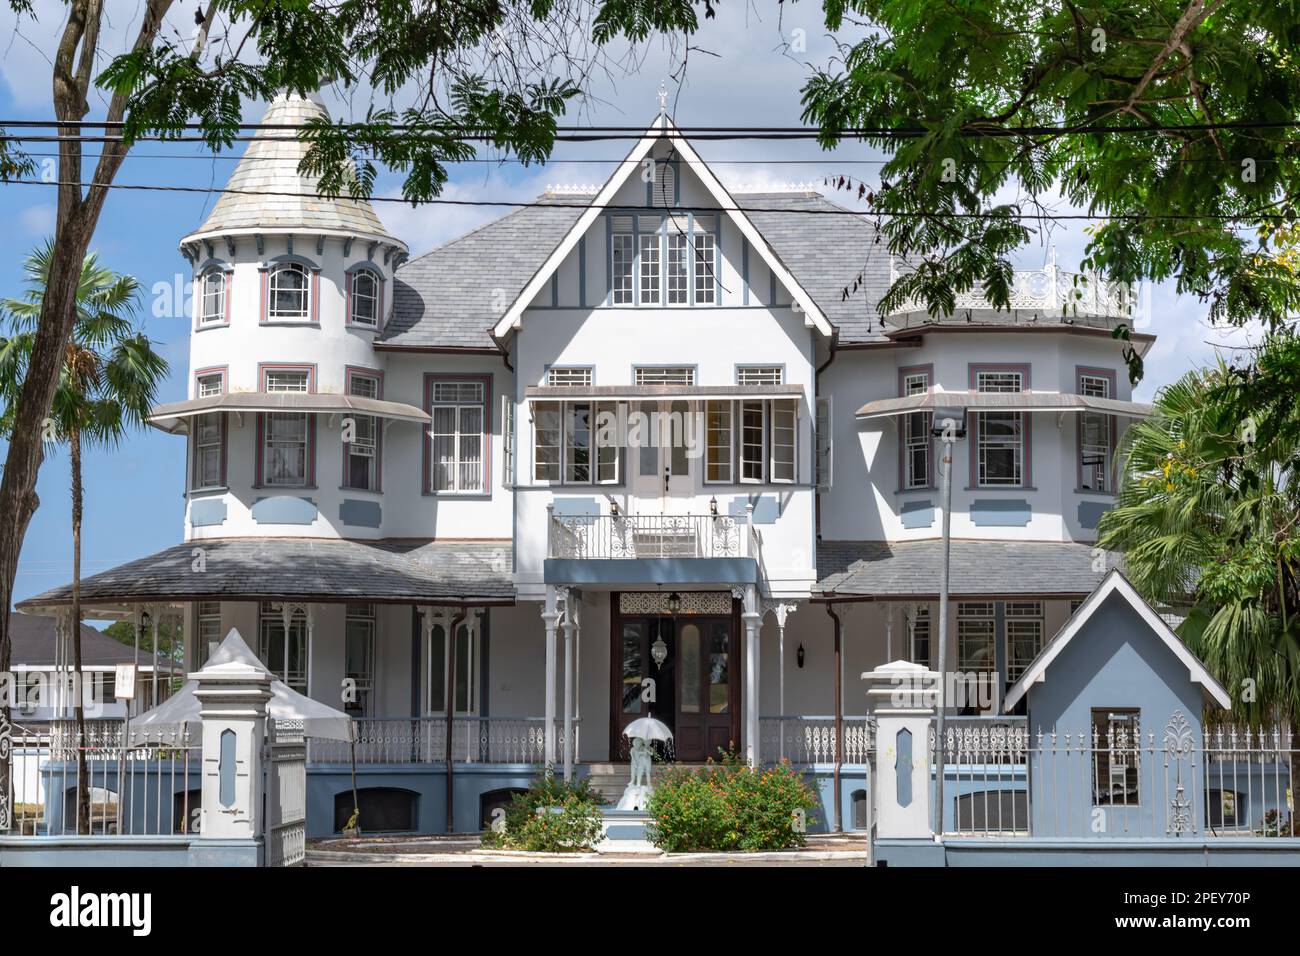 Vintage architecture of a building located in the row of Magnificent Seven, Port of Spain, Trinidad and Tobago. Stock Photo